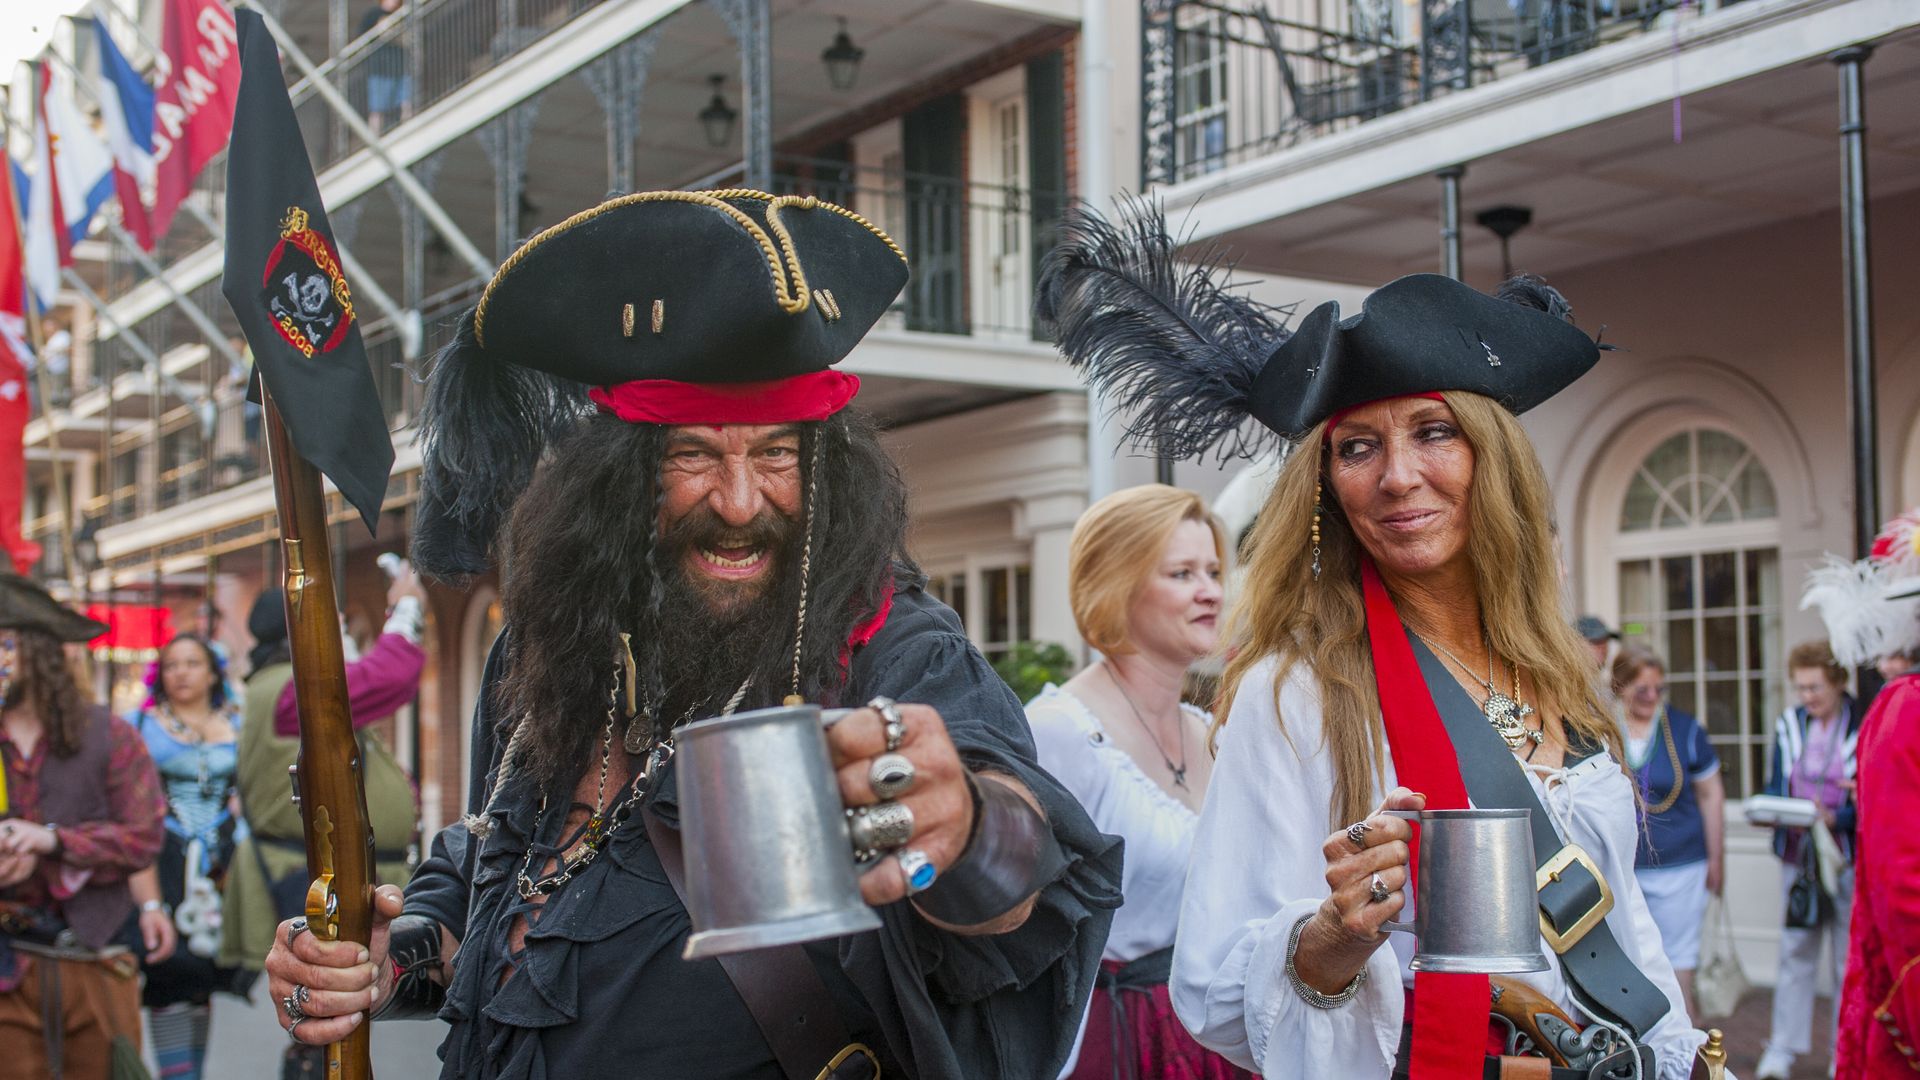 A man dressed like a pirate gestures to the camera with a metal mug while marching in the French Quarter.